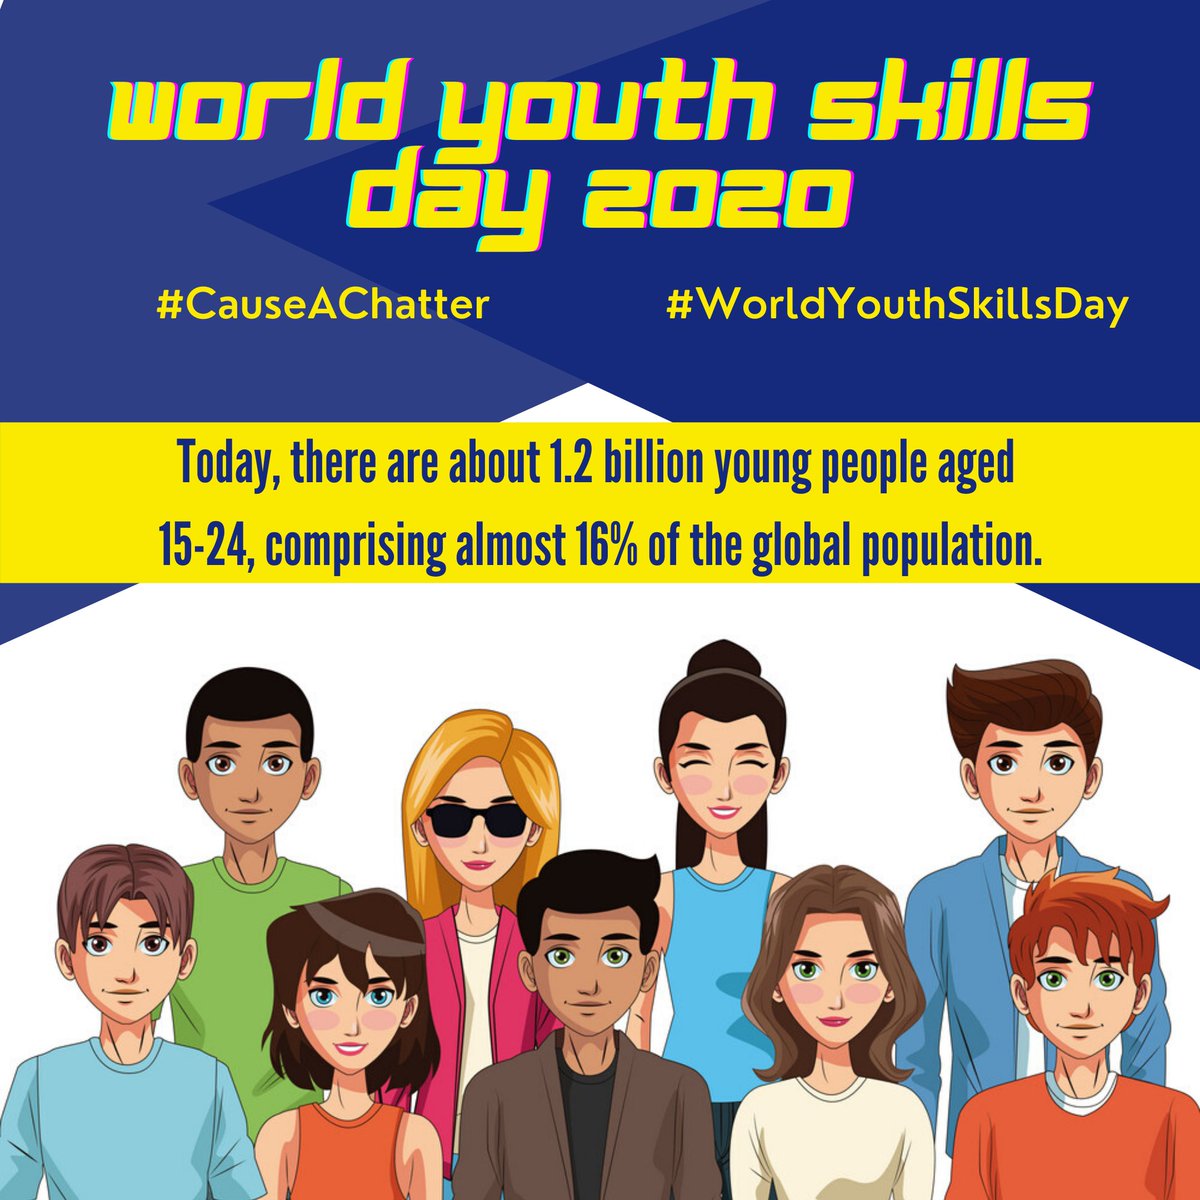 World Youth Skills Day, celebrated on the 15th of July, aims to achieve better socio-economic conditions for today’s youth as a means of addressing the challenges of unemployment and under employment.  #WorldYouthSkillsDay  #CauseAChatter